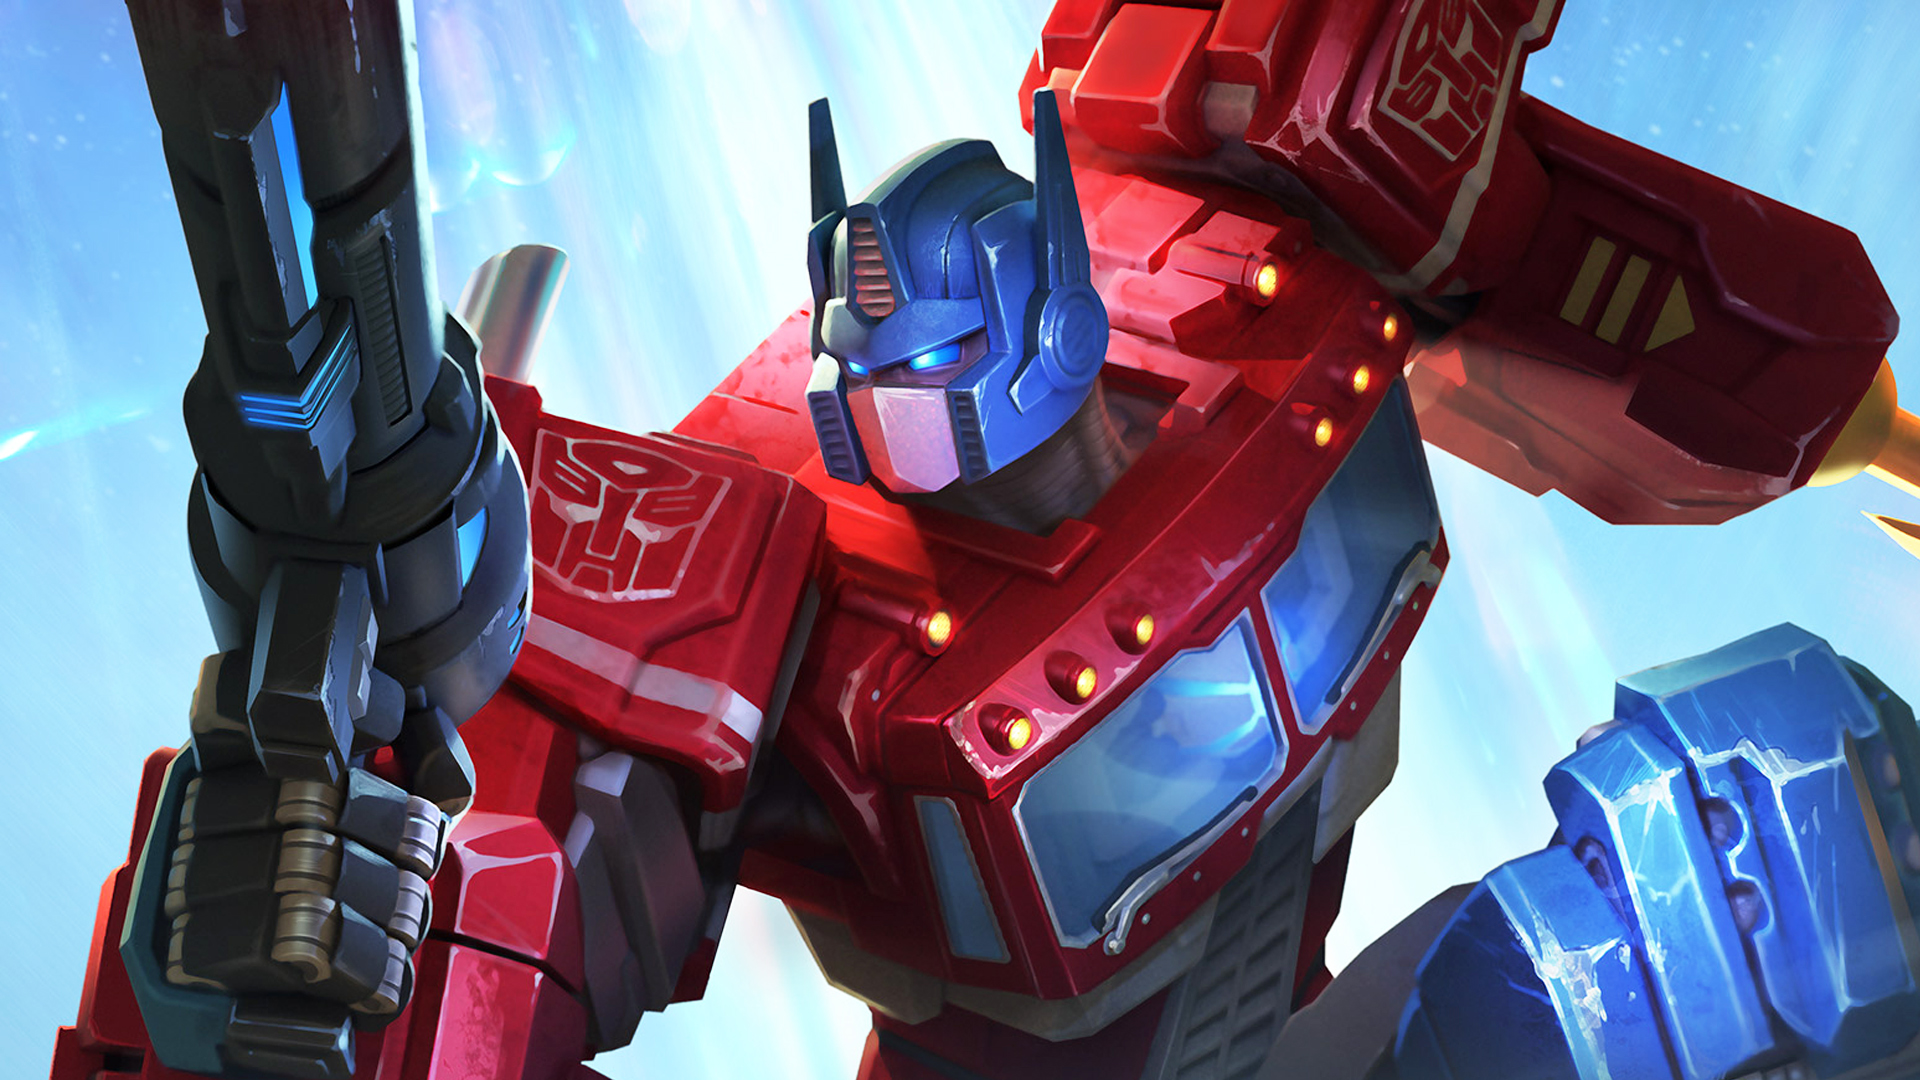 Is Epic teasing a Fortnite Transformers crossover?